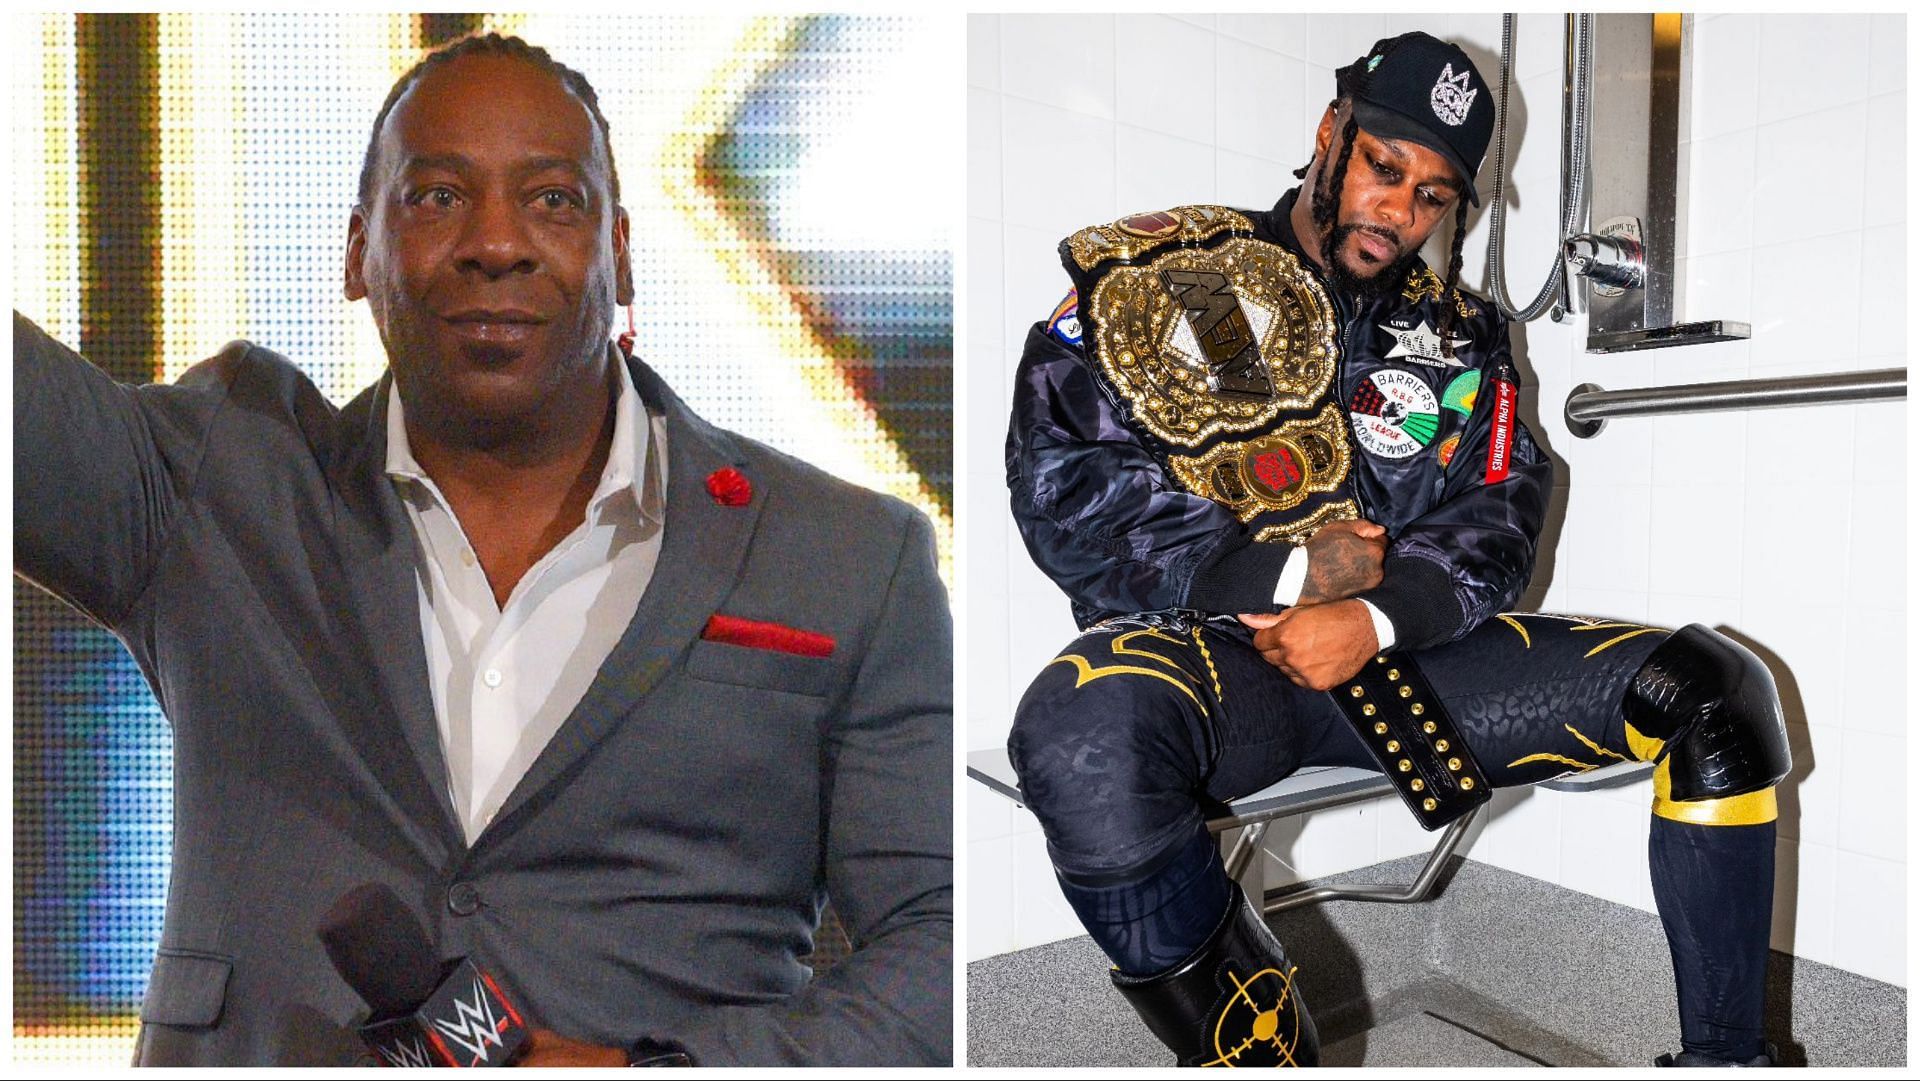 Booker T appears at WWE event, Swerve Strickland with the AEW World Championship